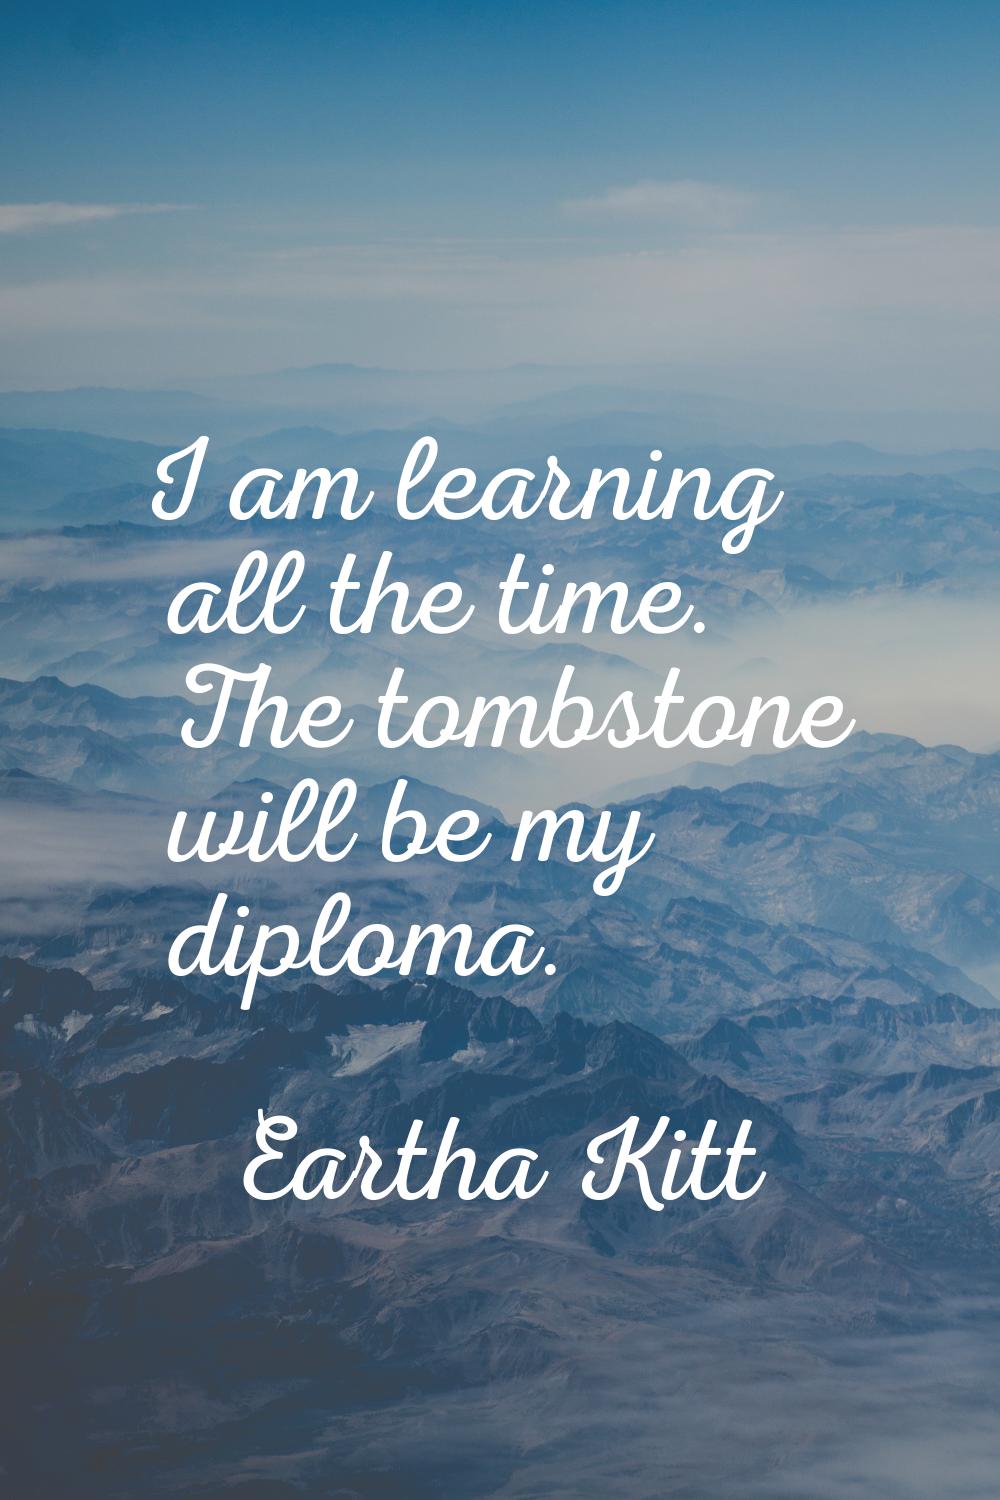 I am learning all the time. The tombstone will be my diploma.